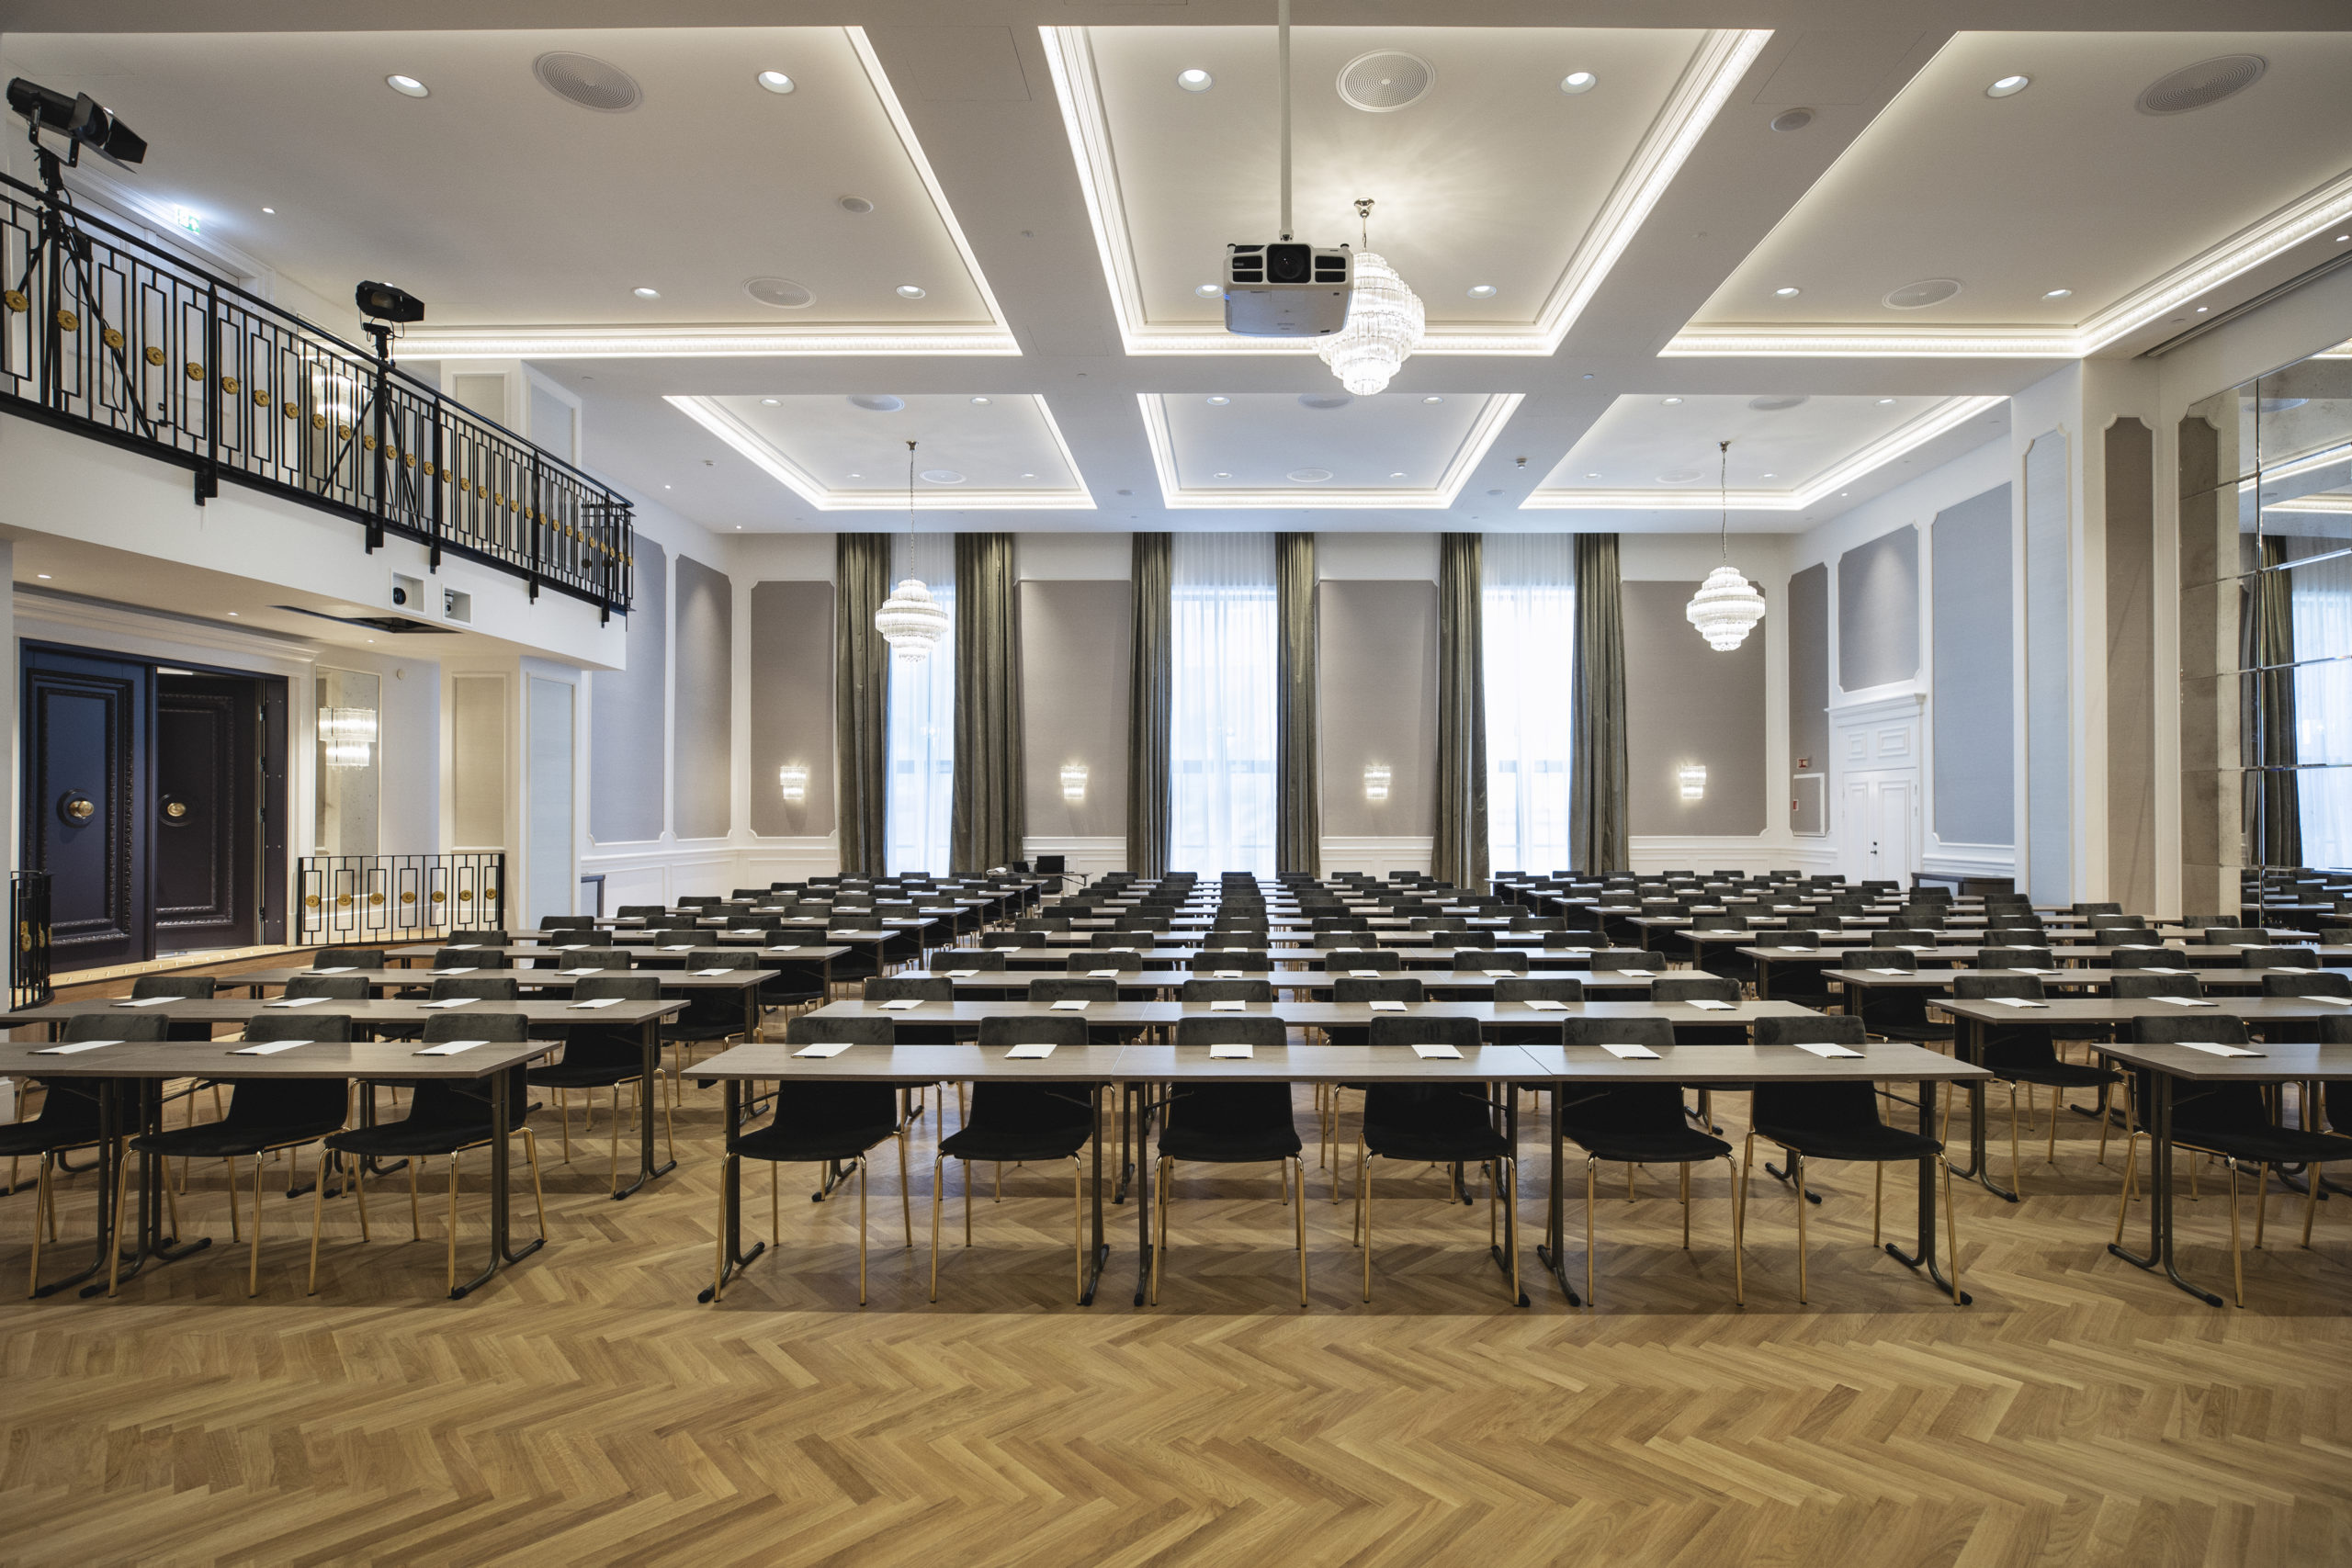 Britannia Hall is spacious and elegant for conference seating with tables